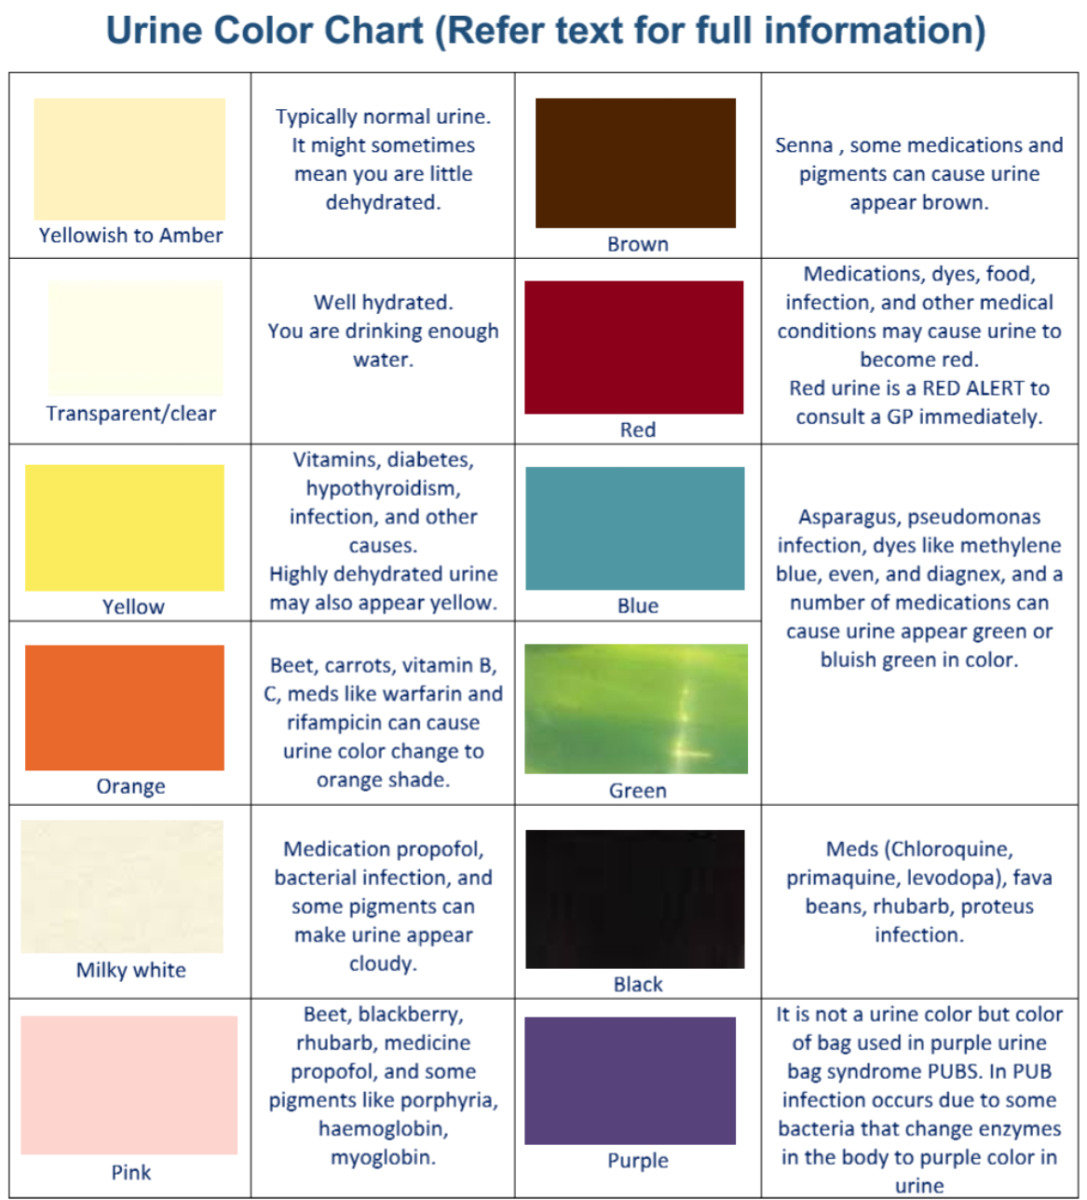 urine colors chart medications and food can change urine color